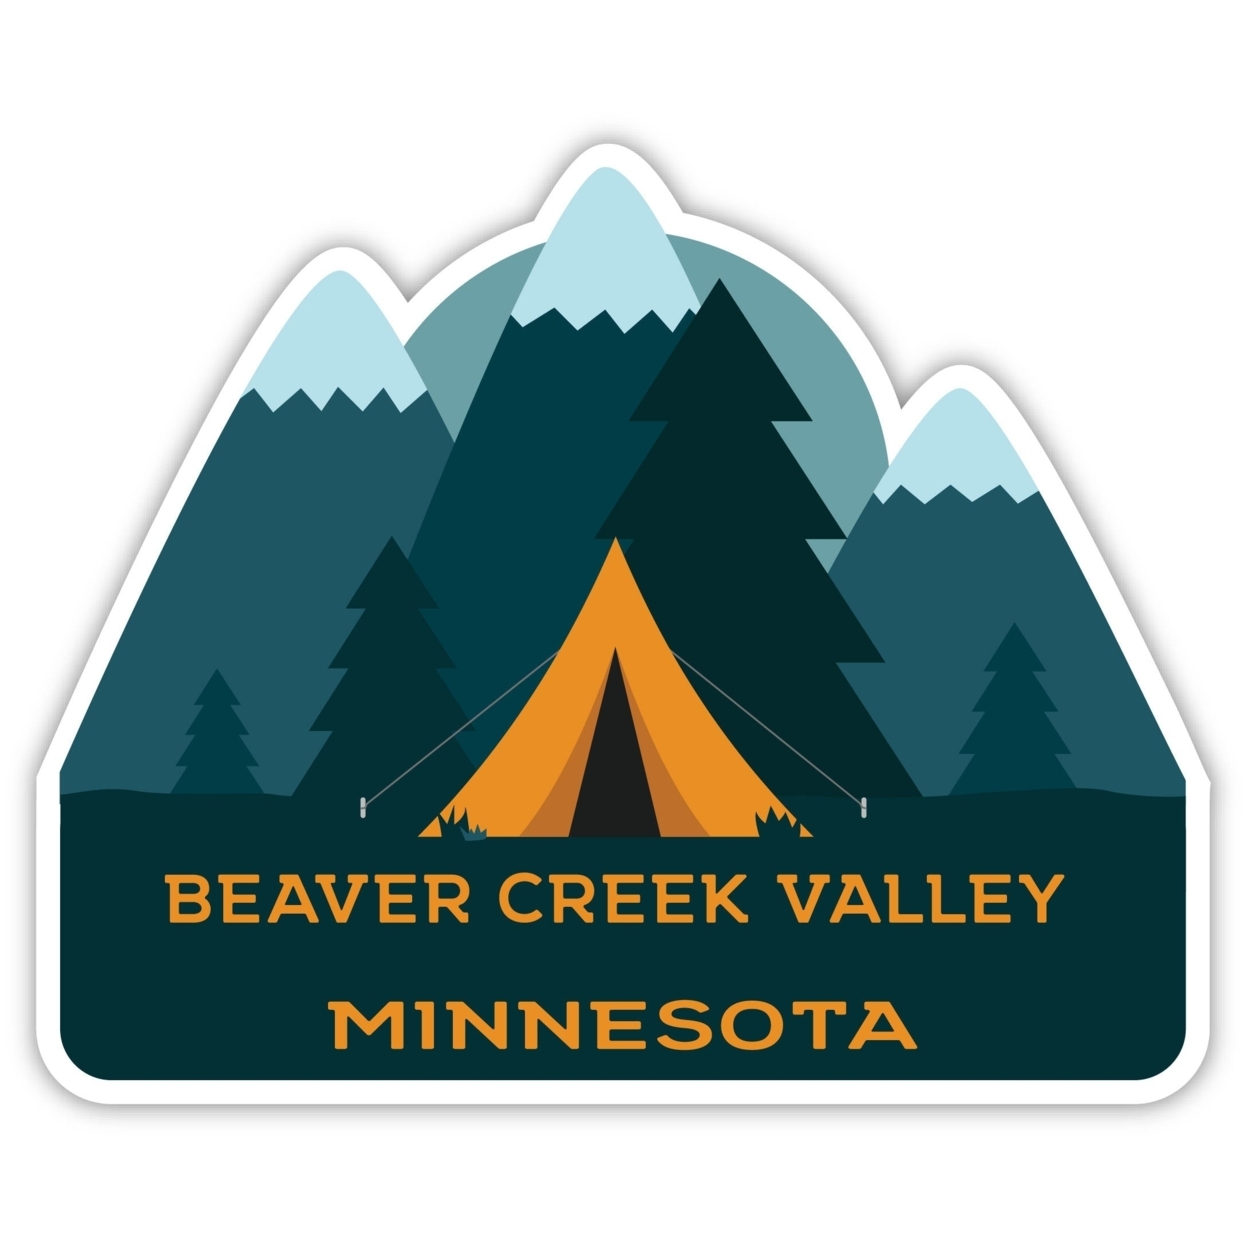 Beaver Creek Valley Minnesota Souvenir Decorative Stickers (Choose Theme And Size) - 4-Pack, 12-Inch, Tent